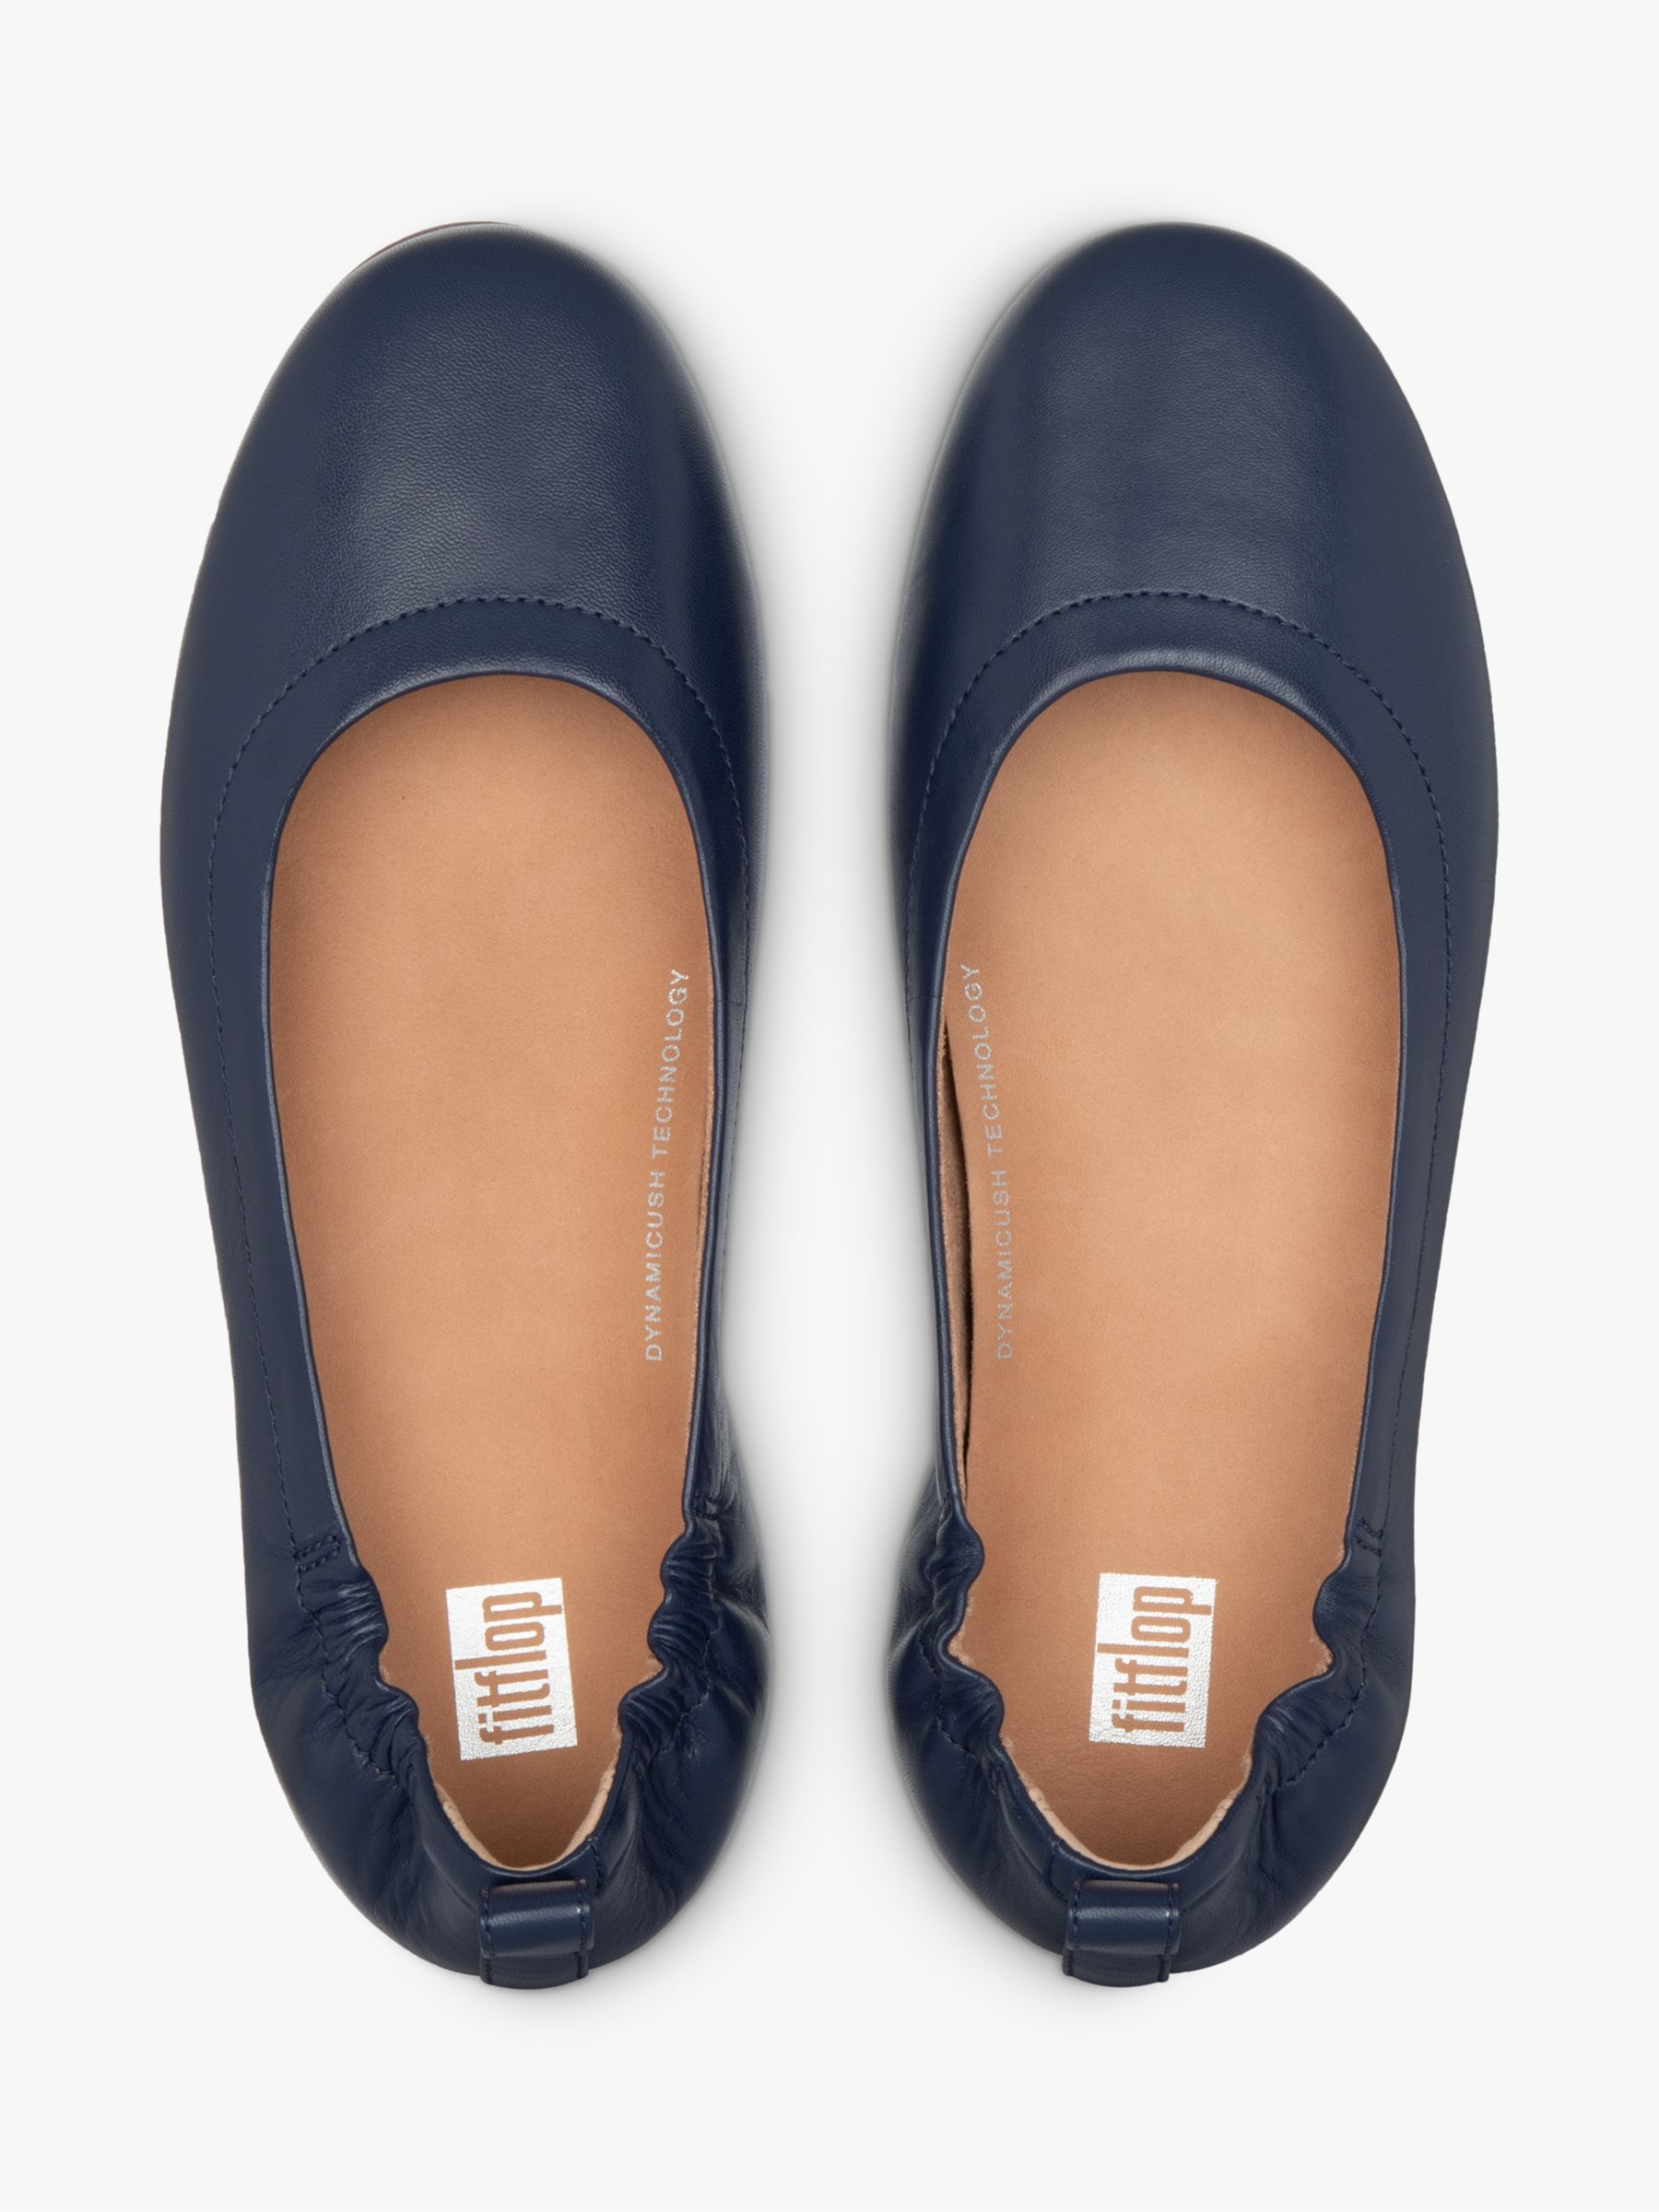 FitFlop Allegro Flat Leather Pumps, Navy at John Lewis & Partners